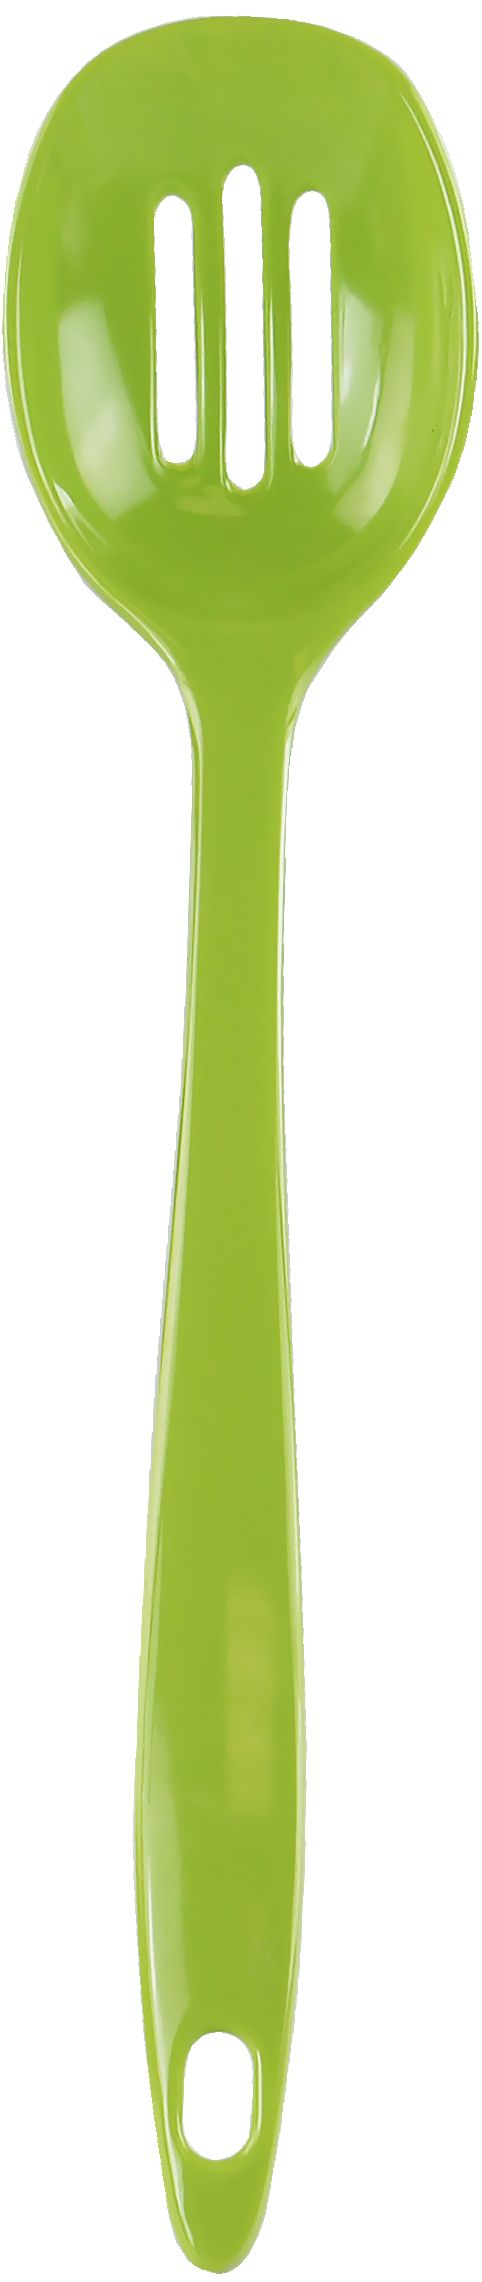 98391 Caylpso Basics Slotted Spoon, Lime